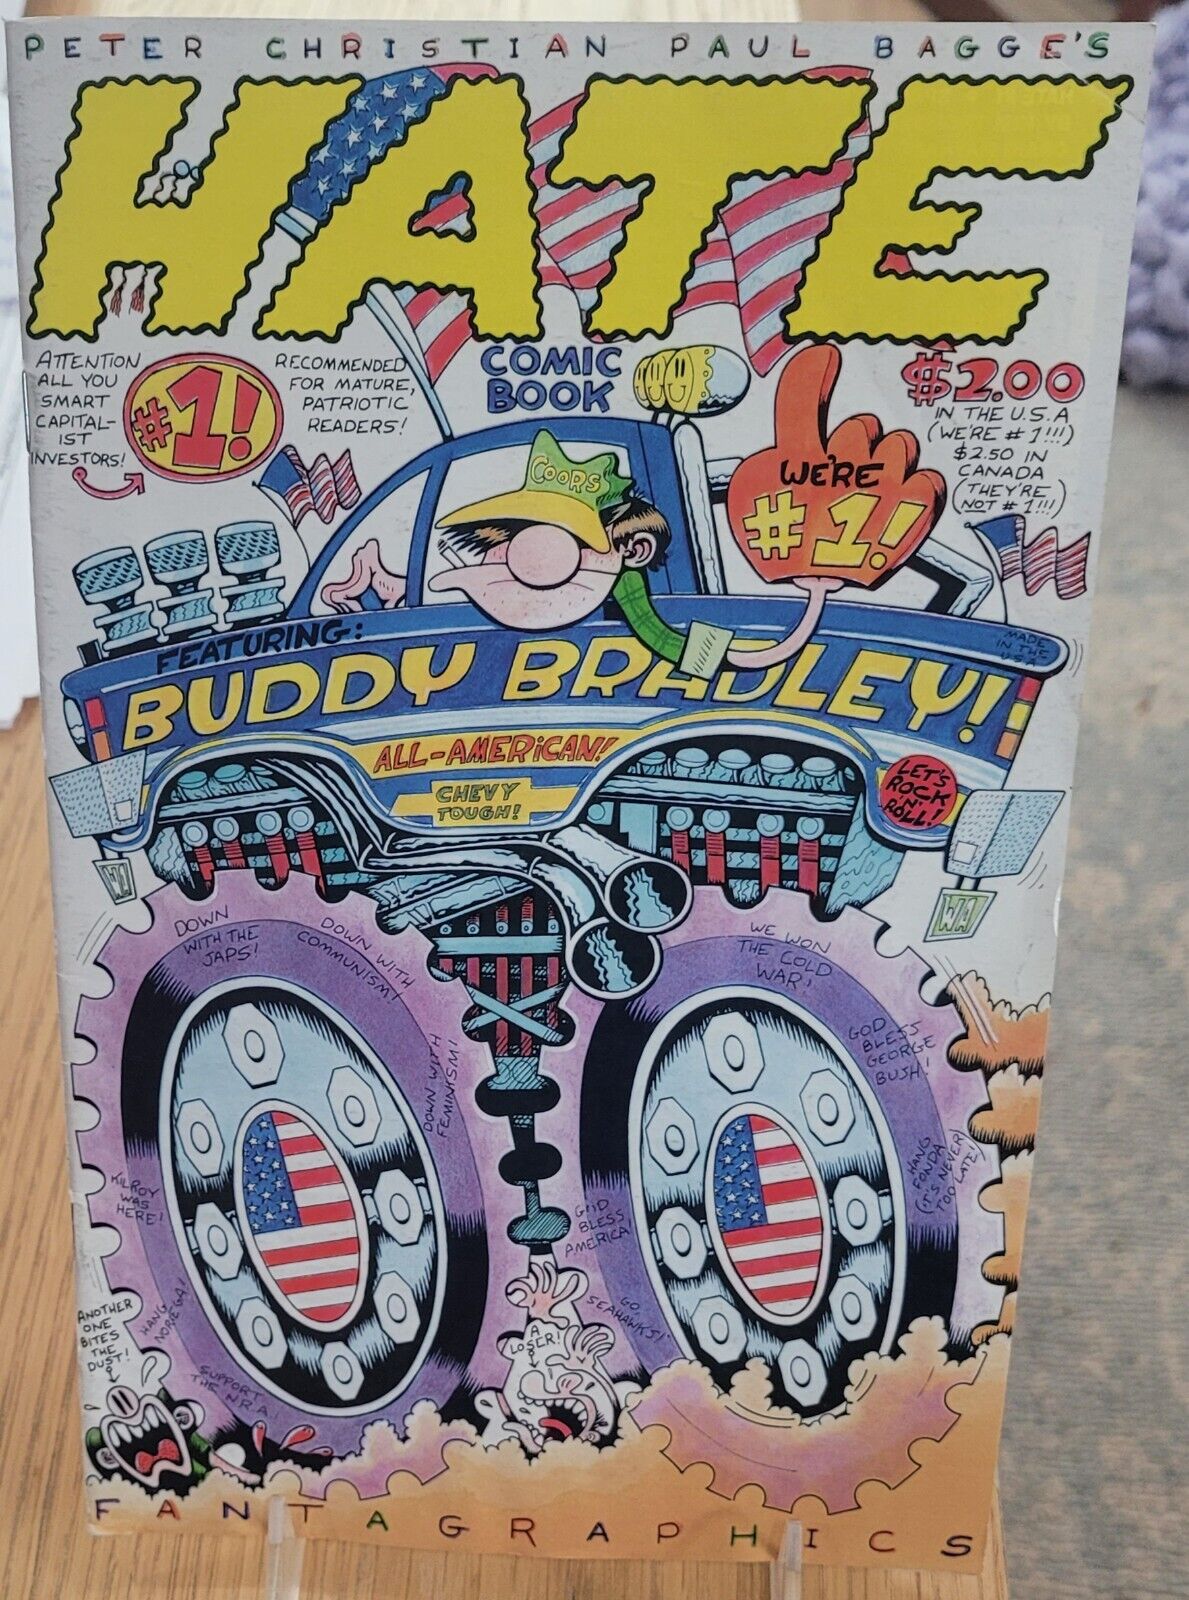 Hate #1 by Peter Bagge